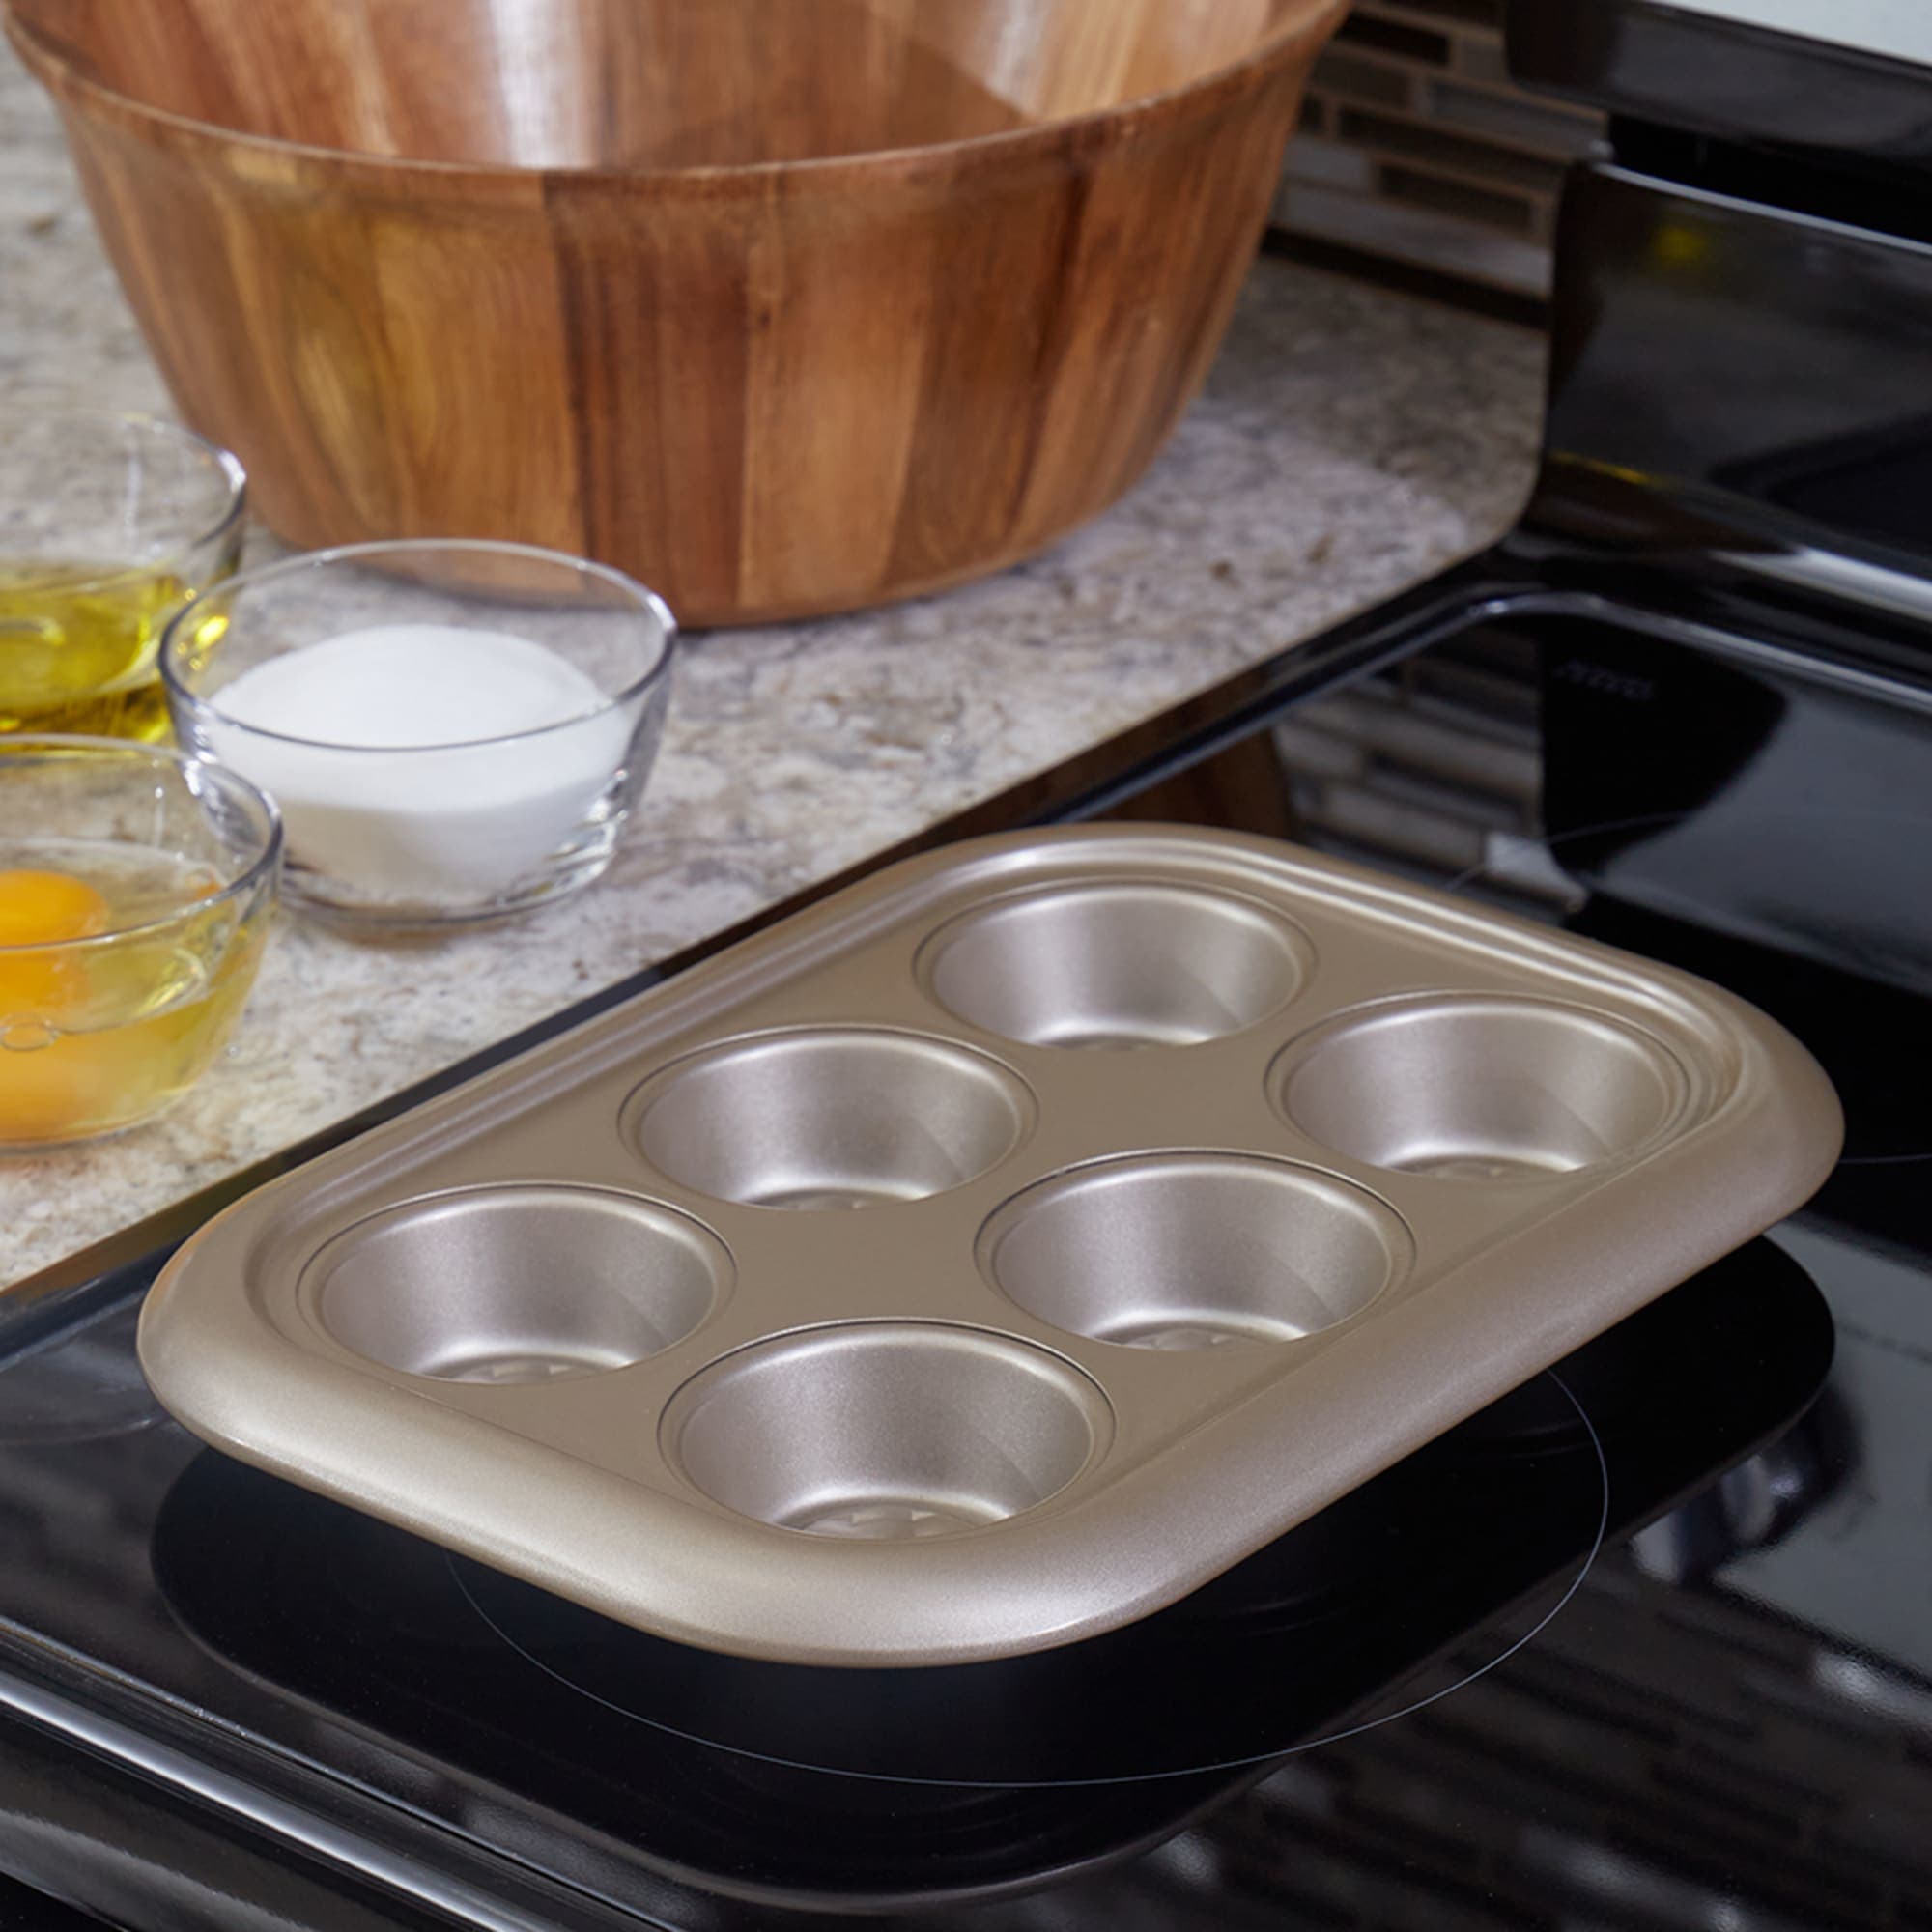 Home Basics Aurelia Non-Stick 6-Cup Carbon Steel Muffin Pan, Gold $5.00 EACH, CASE PACK OF 12